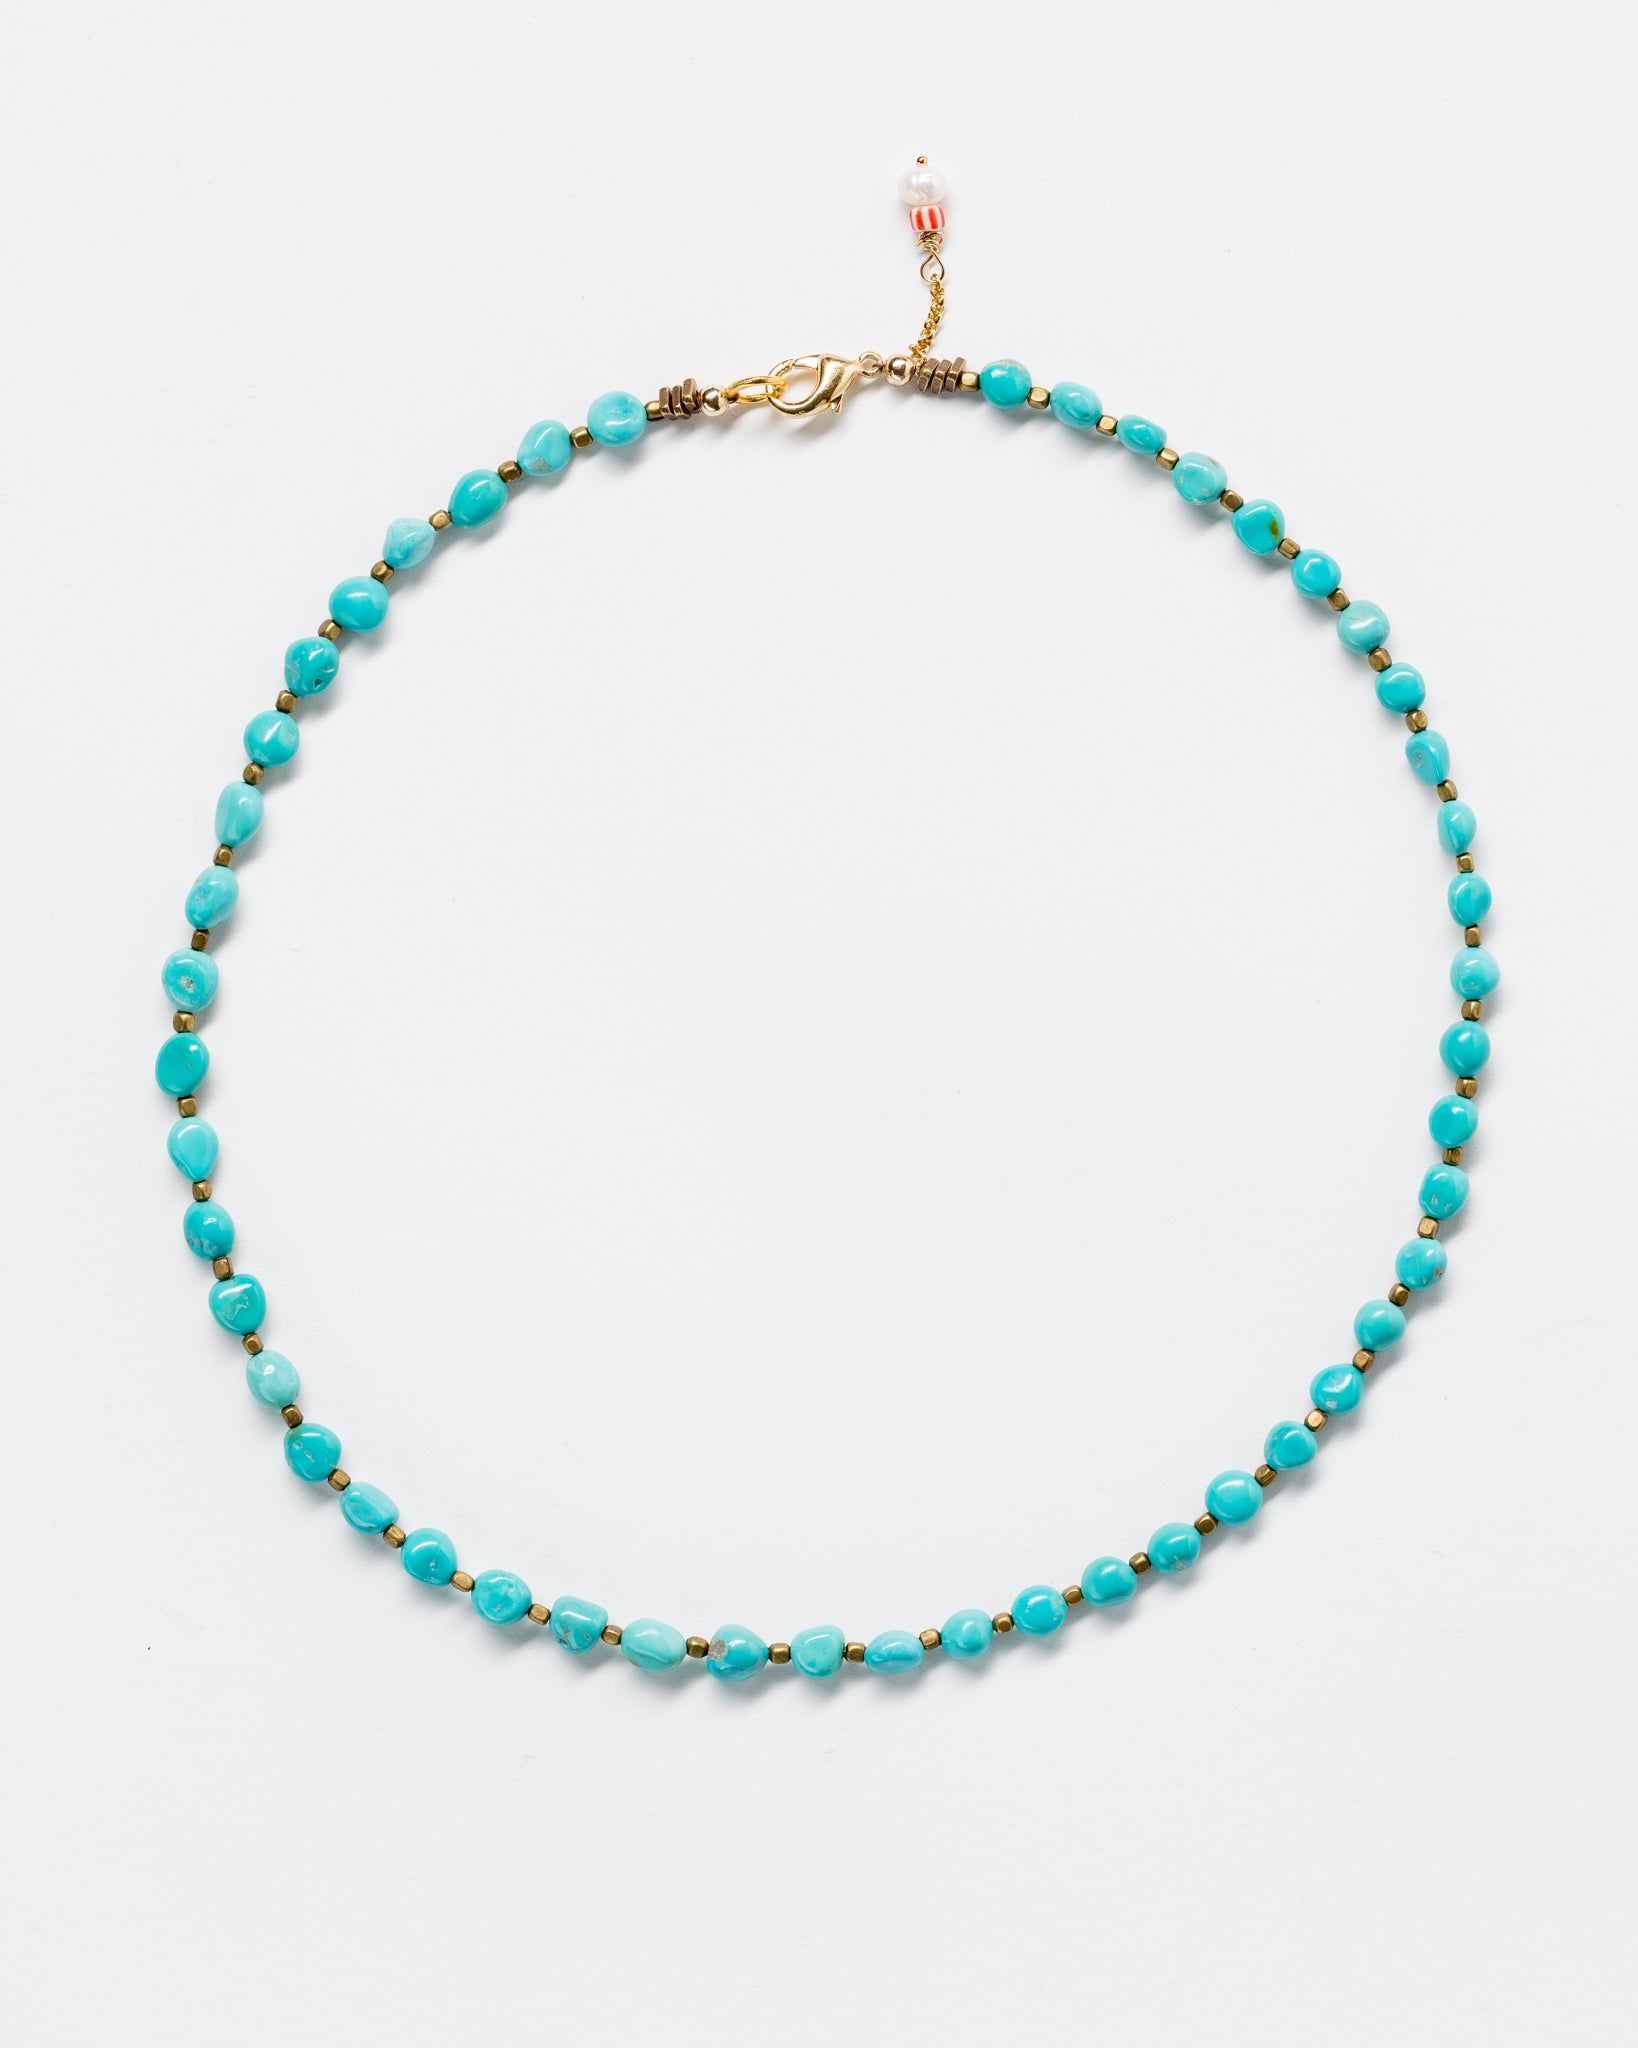 Designs By Raya Turquoise Bead Necklace with gold accents and an Arizona-style clasp, displayed against a white background.